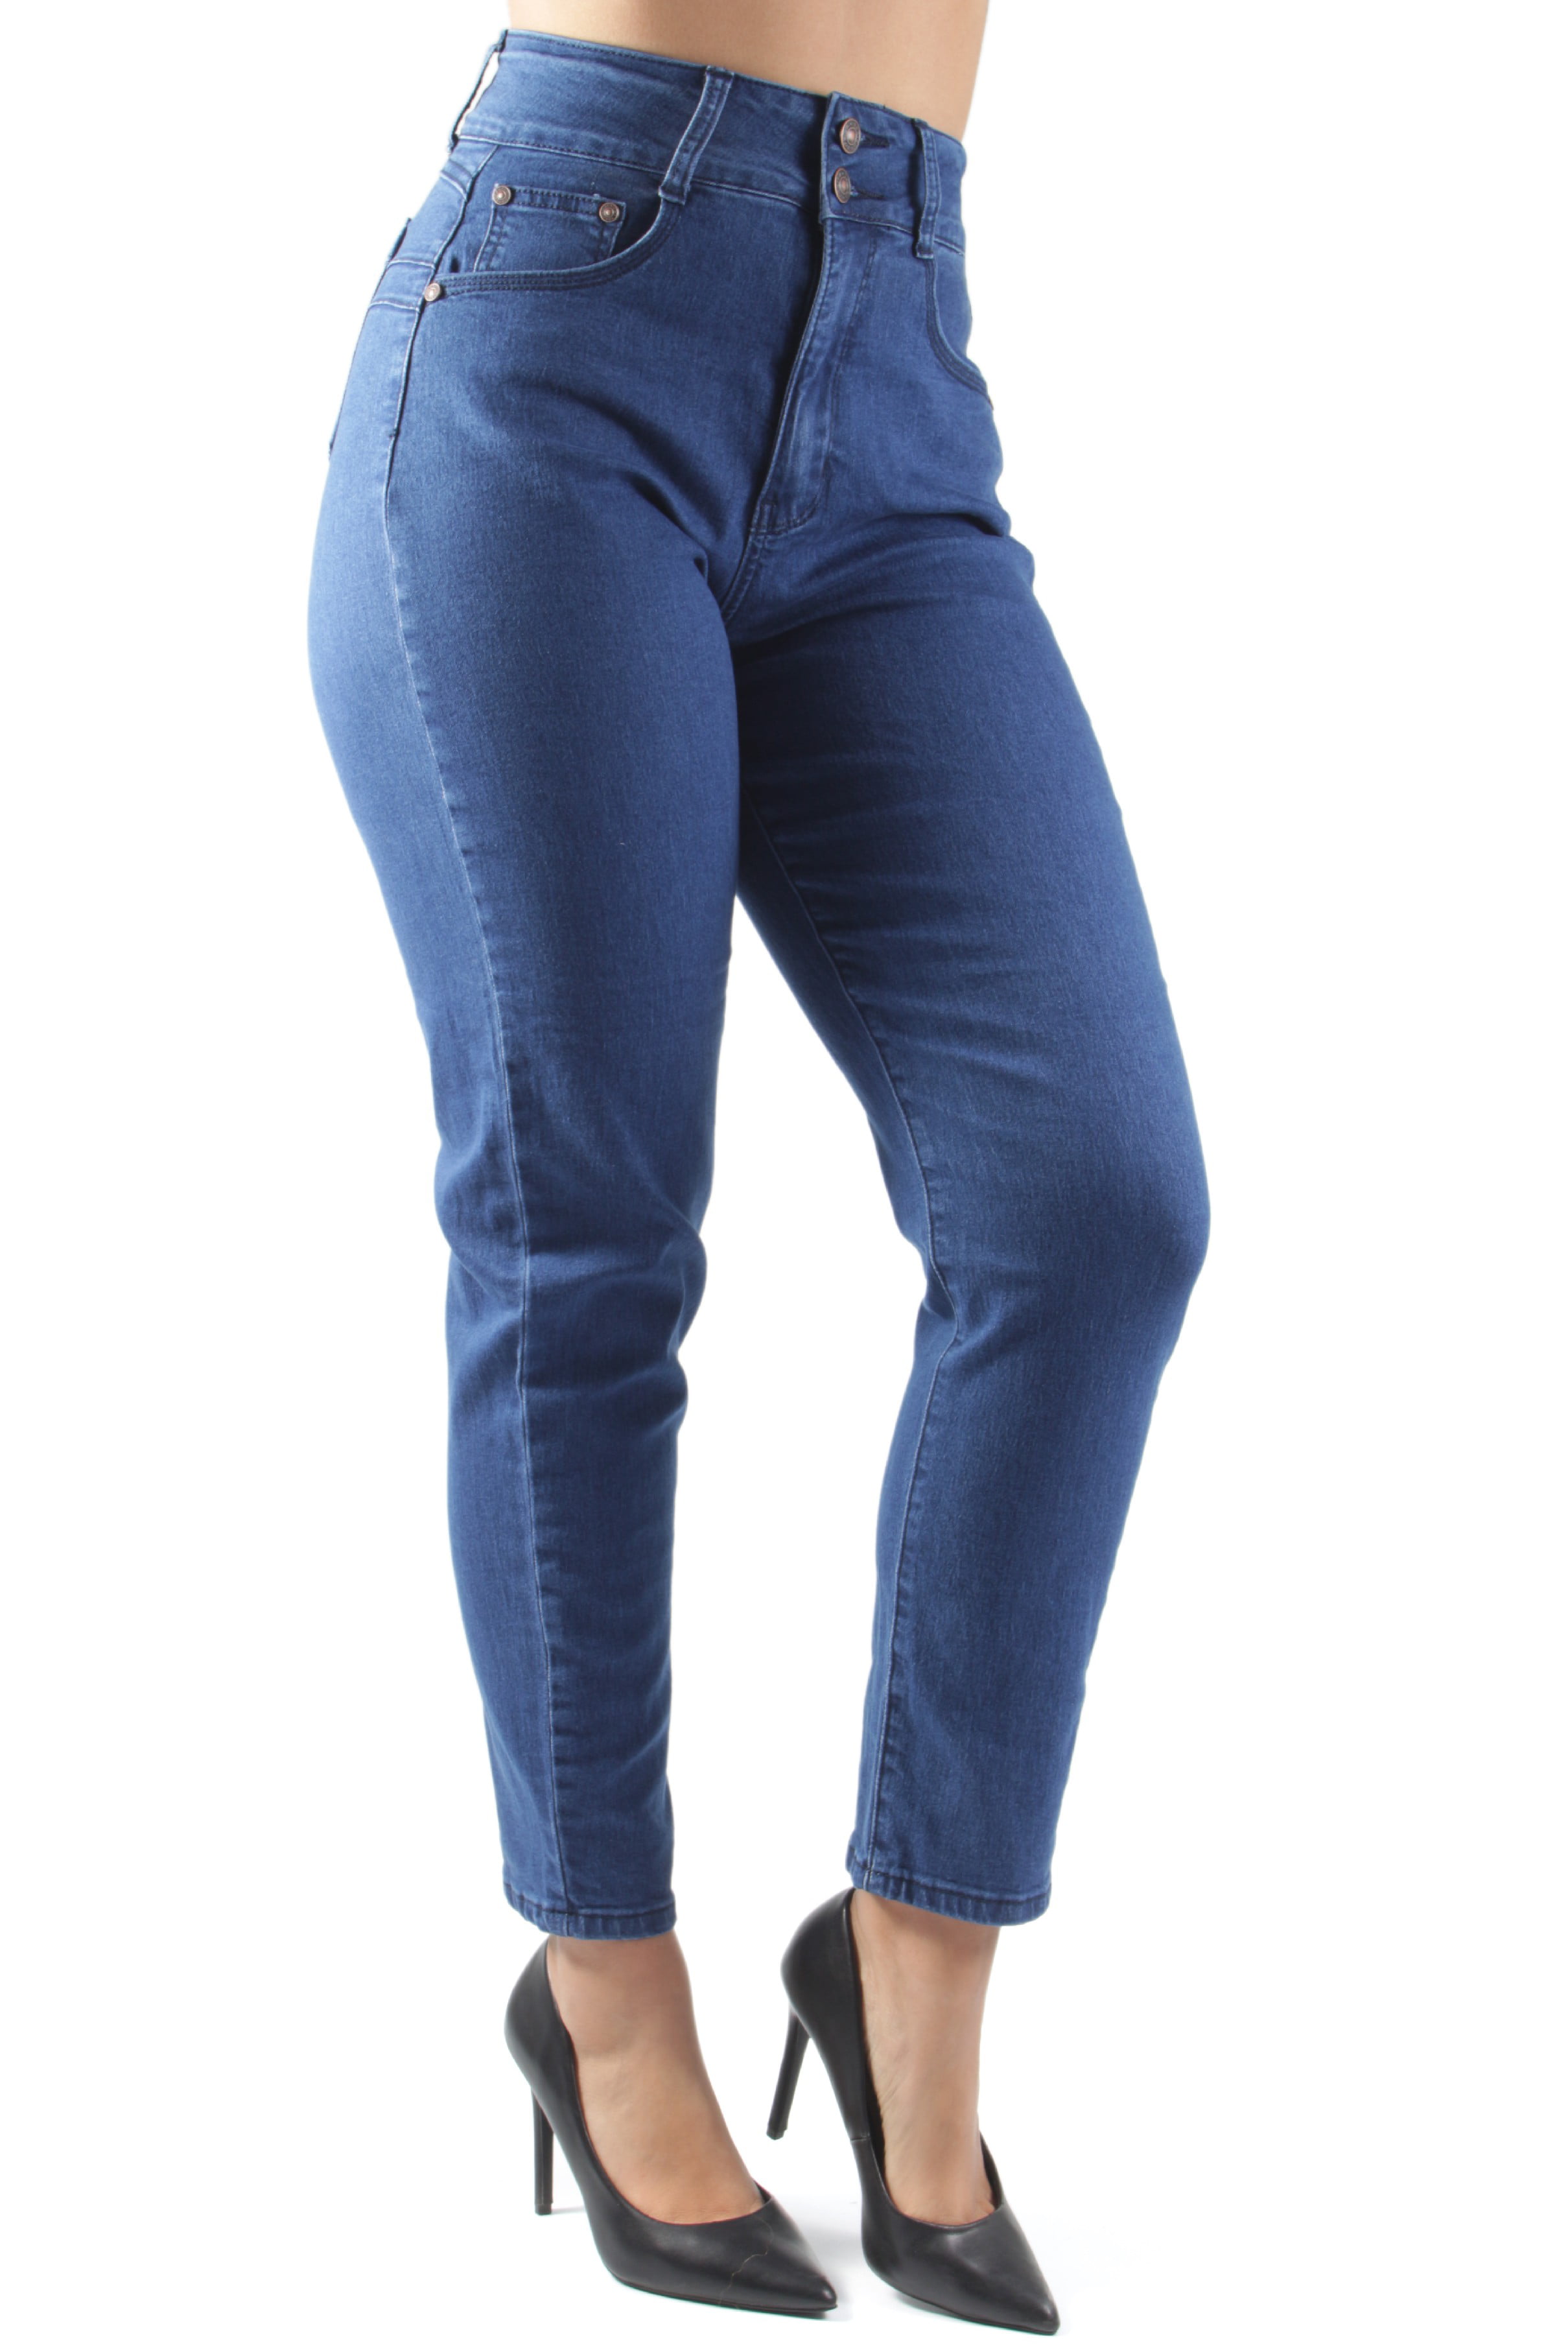  HGps8w Skinny Jeans for Women High Waisted Stretch Slim Fit  Butt Lifting Tight Denim Pants with Pockets : Clothing, Shoes & Jewelry